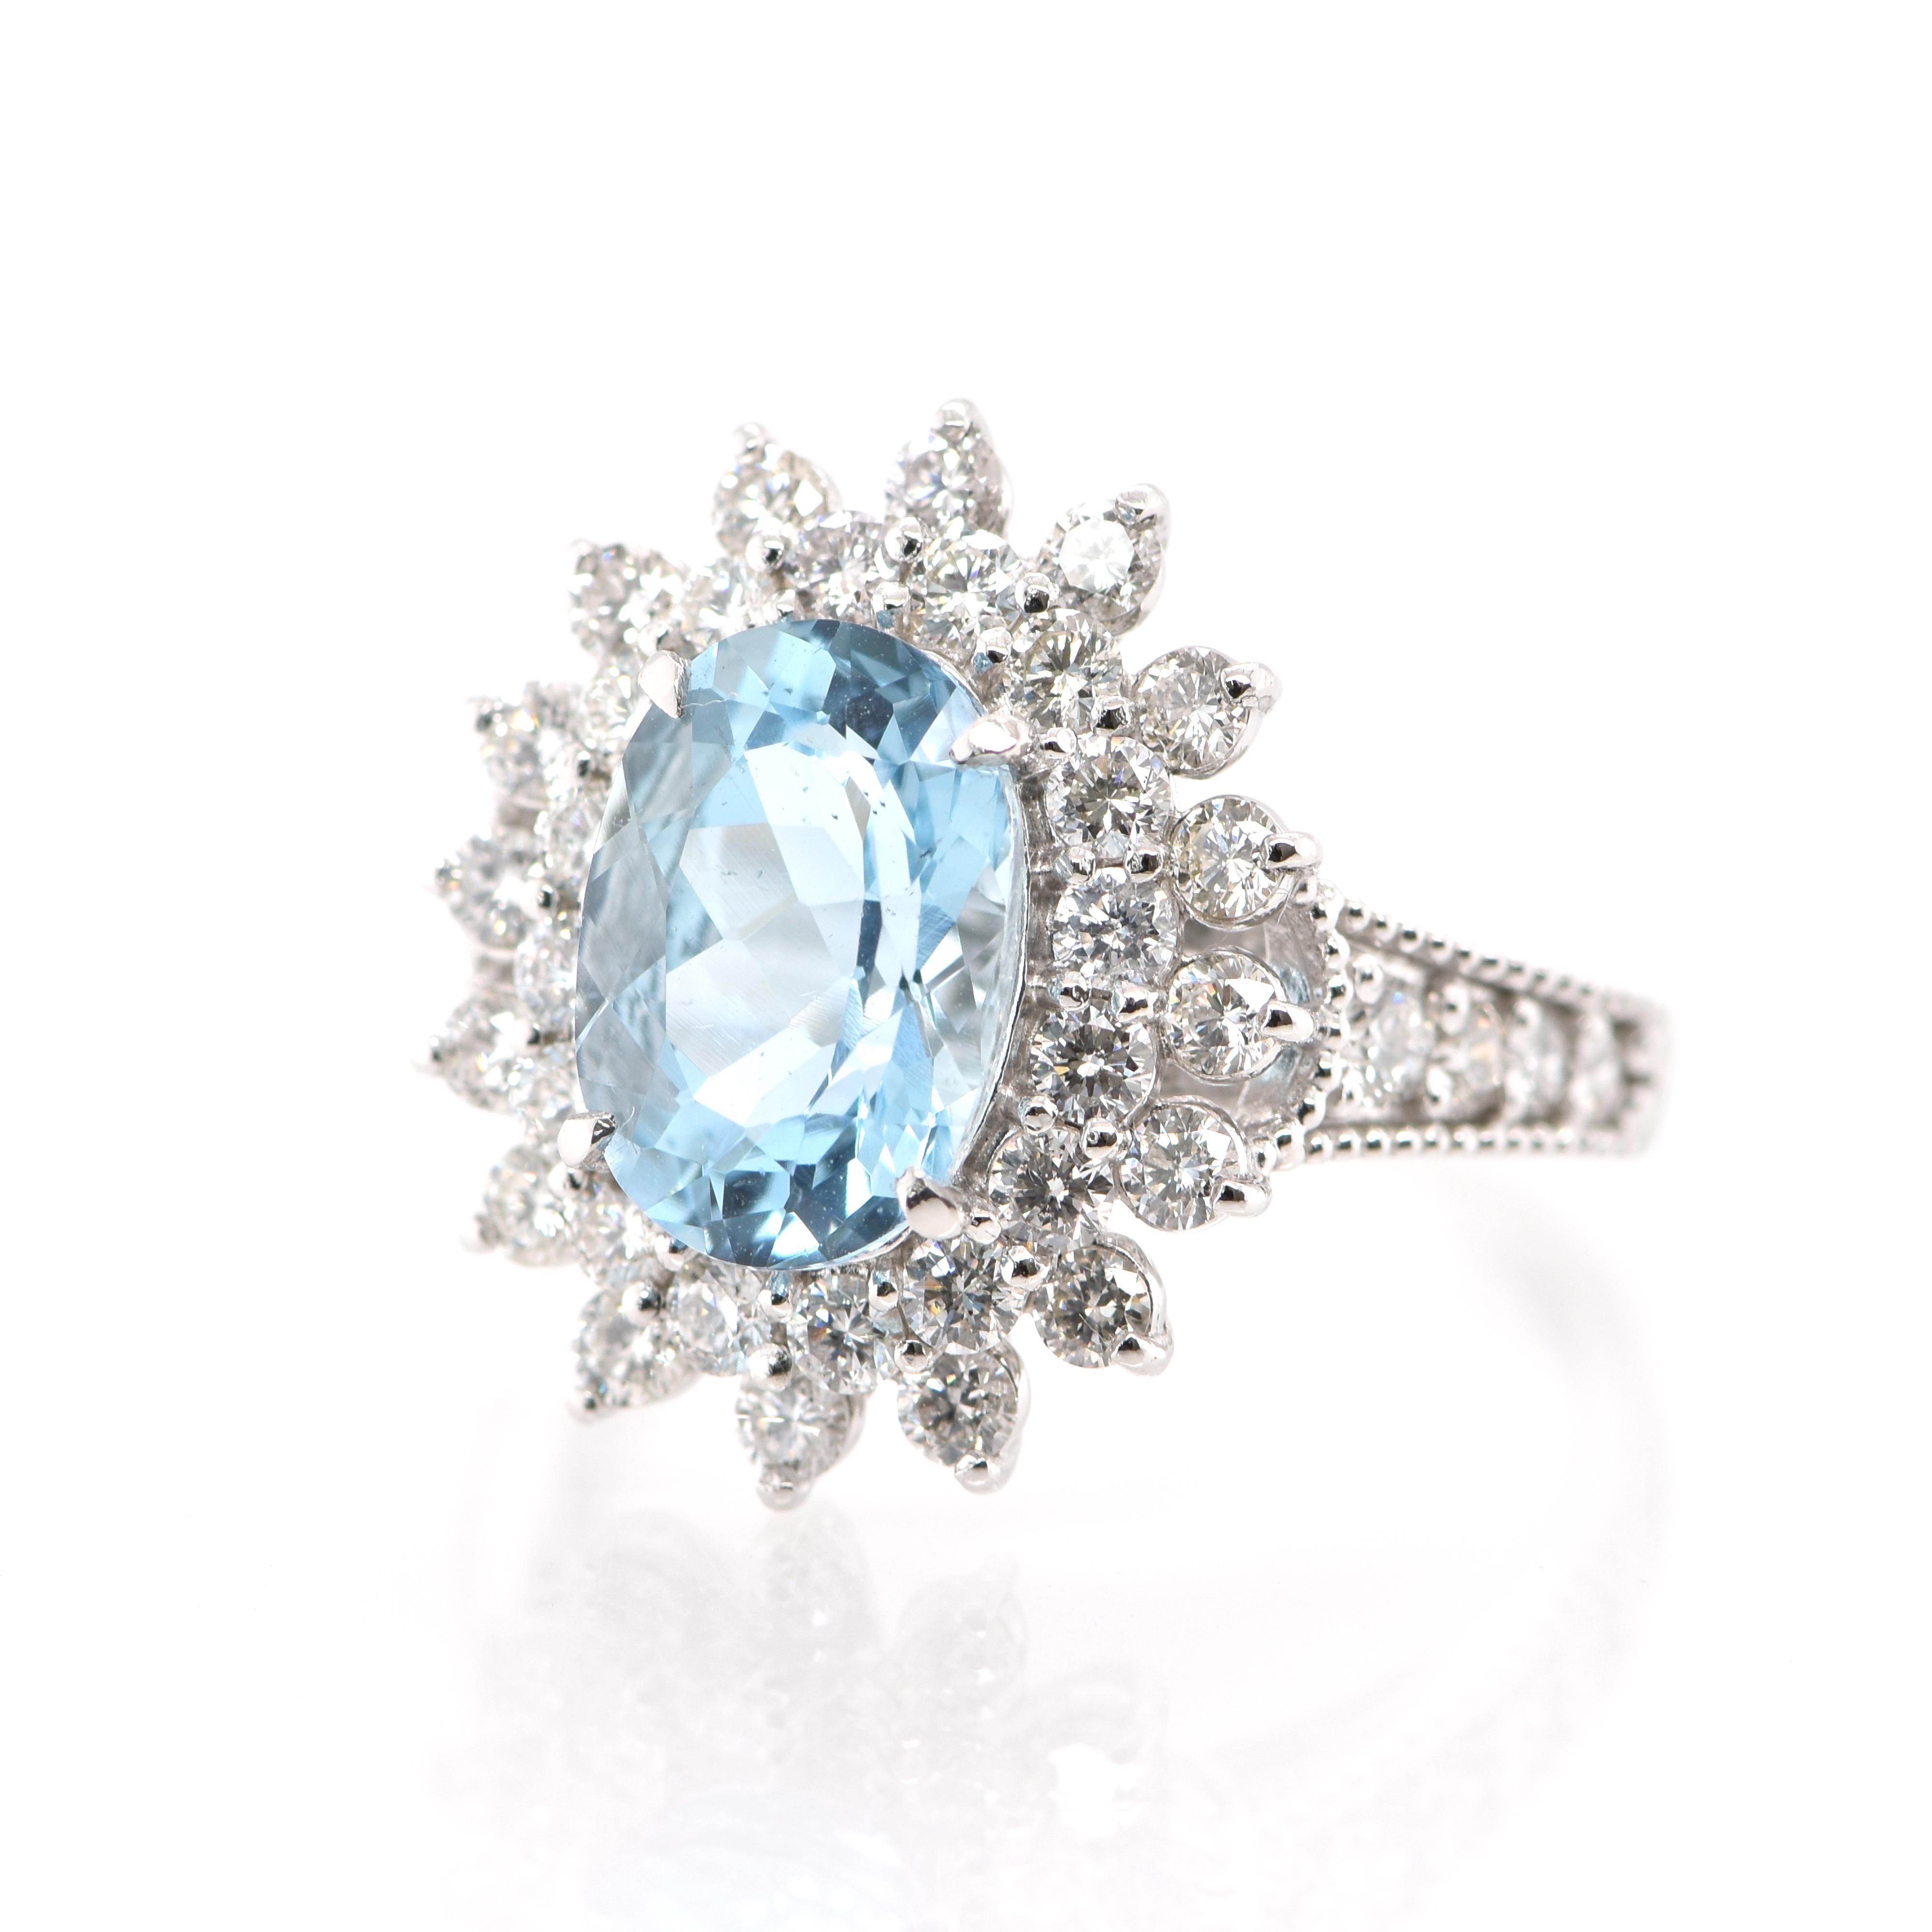 A beautiful Cocktail Ring featuring a 2.42 Carat Natural Aquamarine and 1.18 Carats of White Round Brilliant Diamond Accents set in Platinum. Aquamarines have been prized gems throughout human history for their cool blue color. They historically